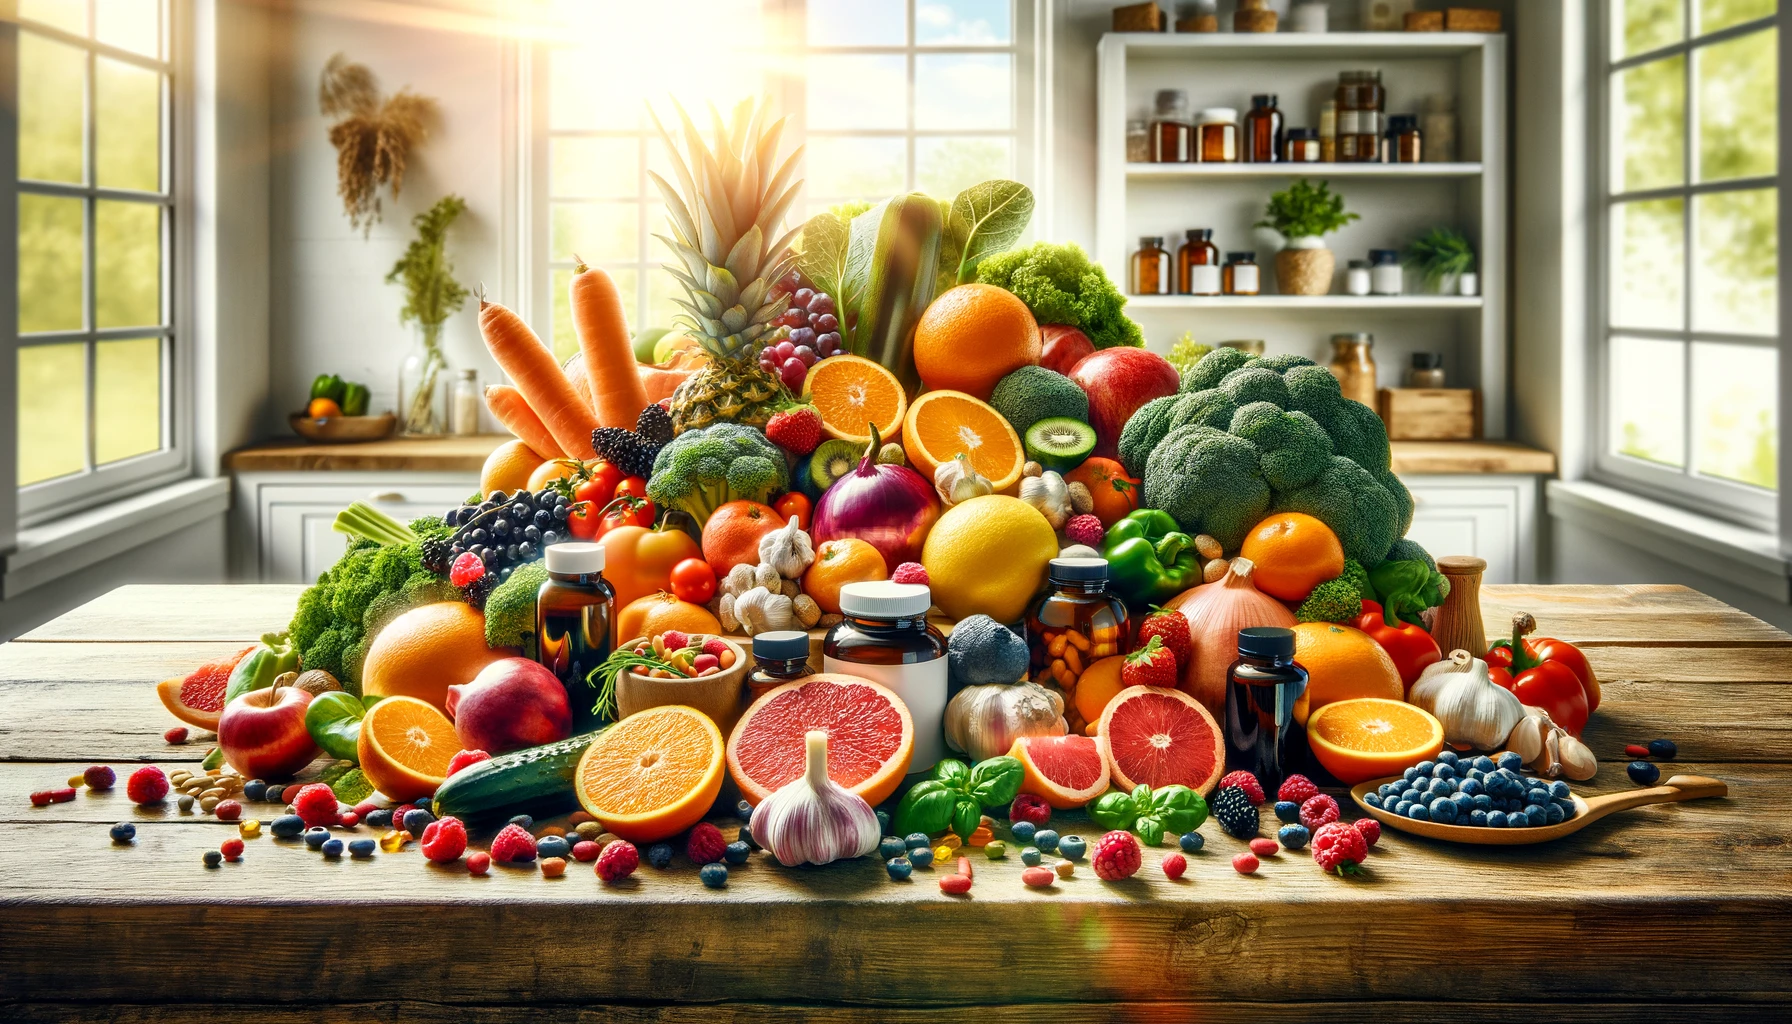 A colorful display of immune-boosting foods and supplements representing "Immune Support" on Healthy Life - New Start.